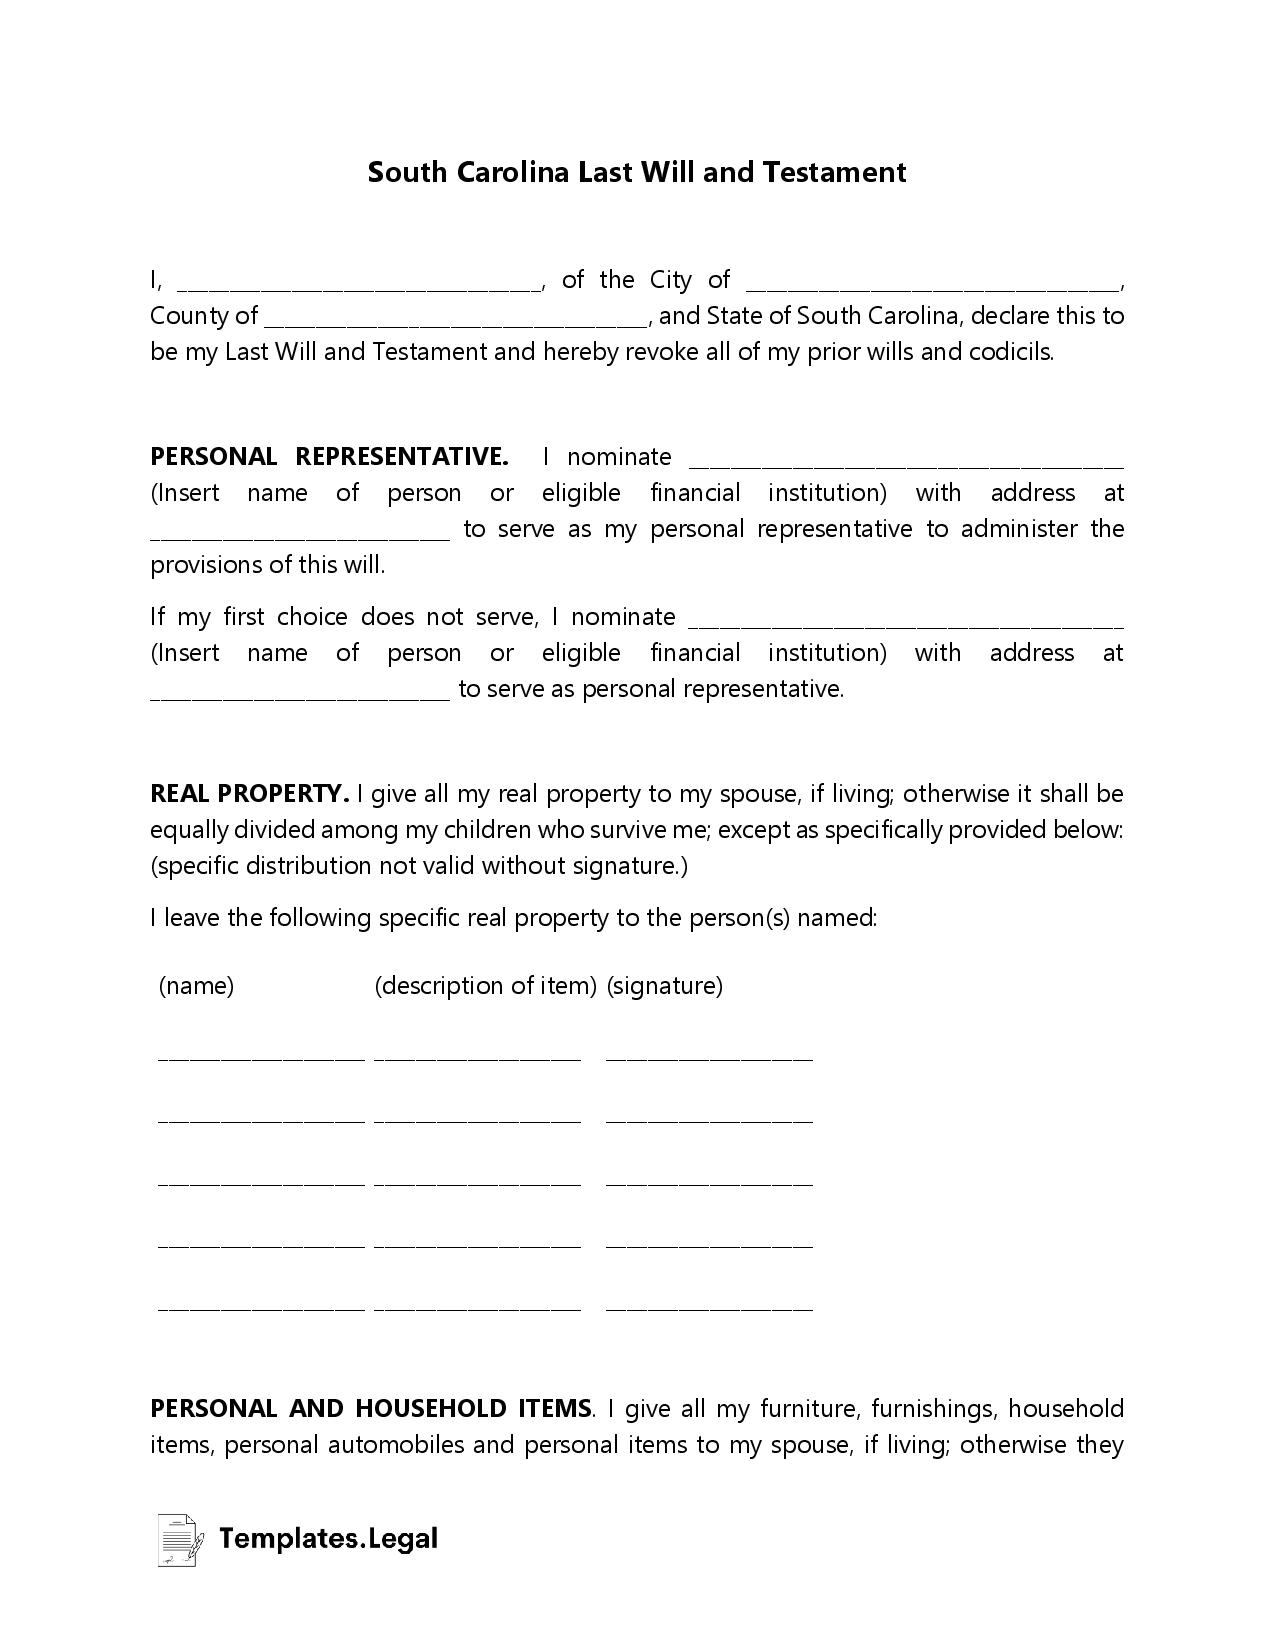 South Carolina Last Will and Testament - Templates.Legal